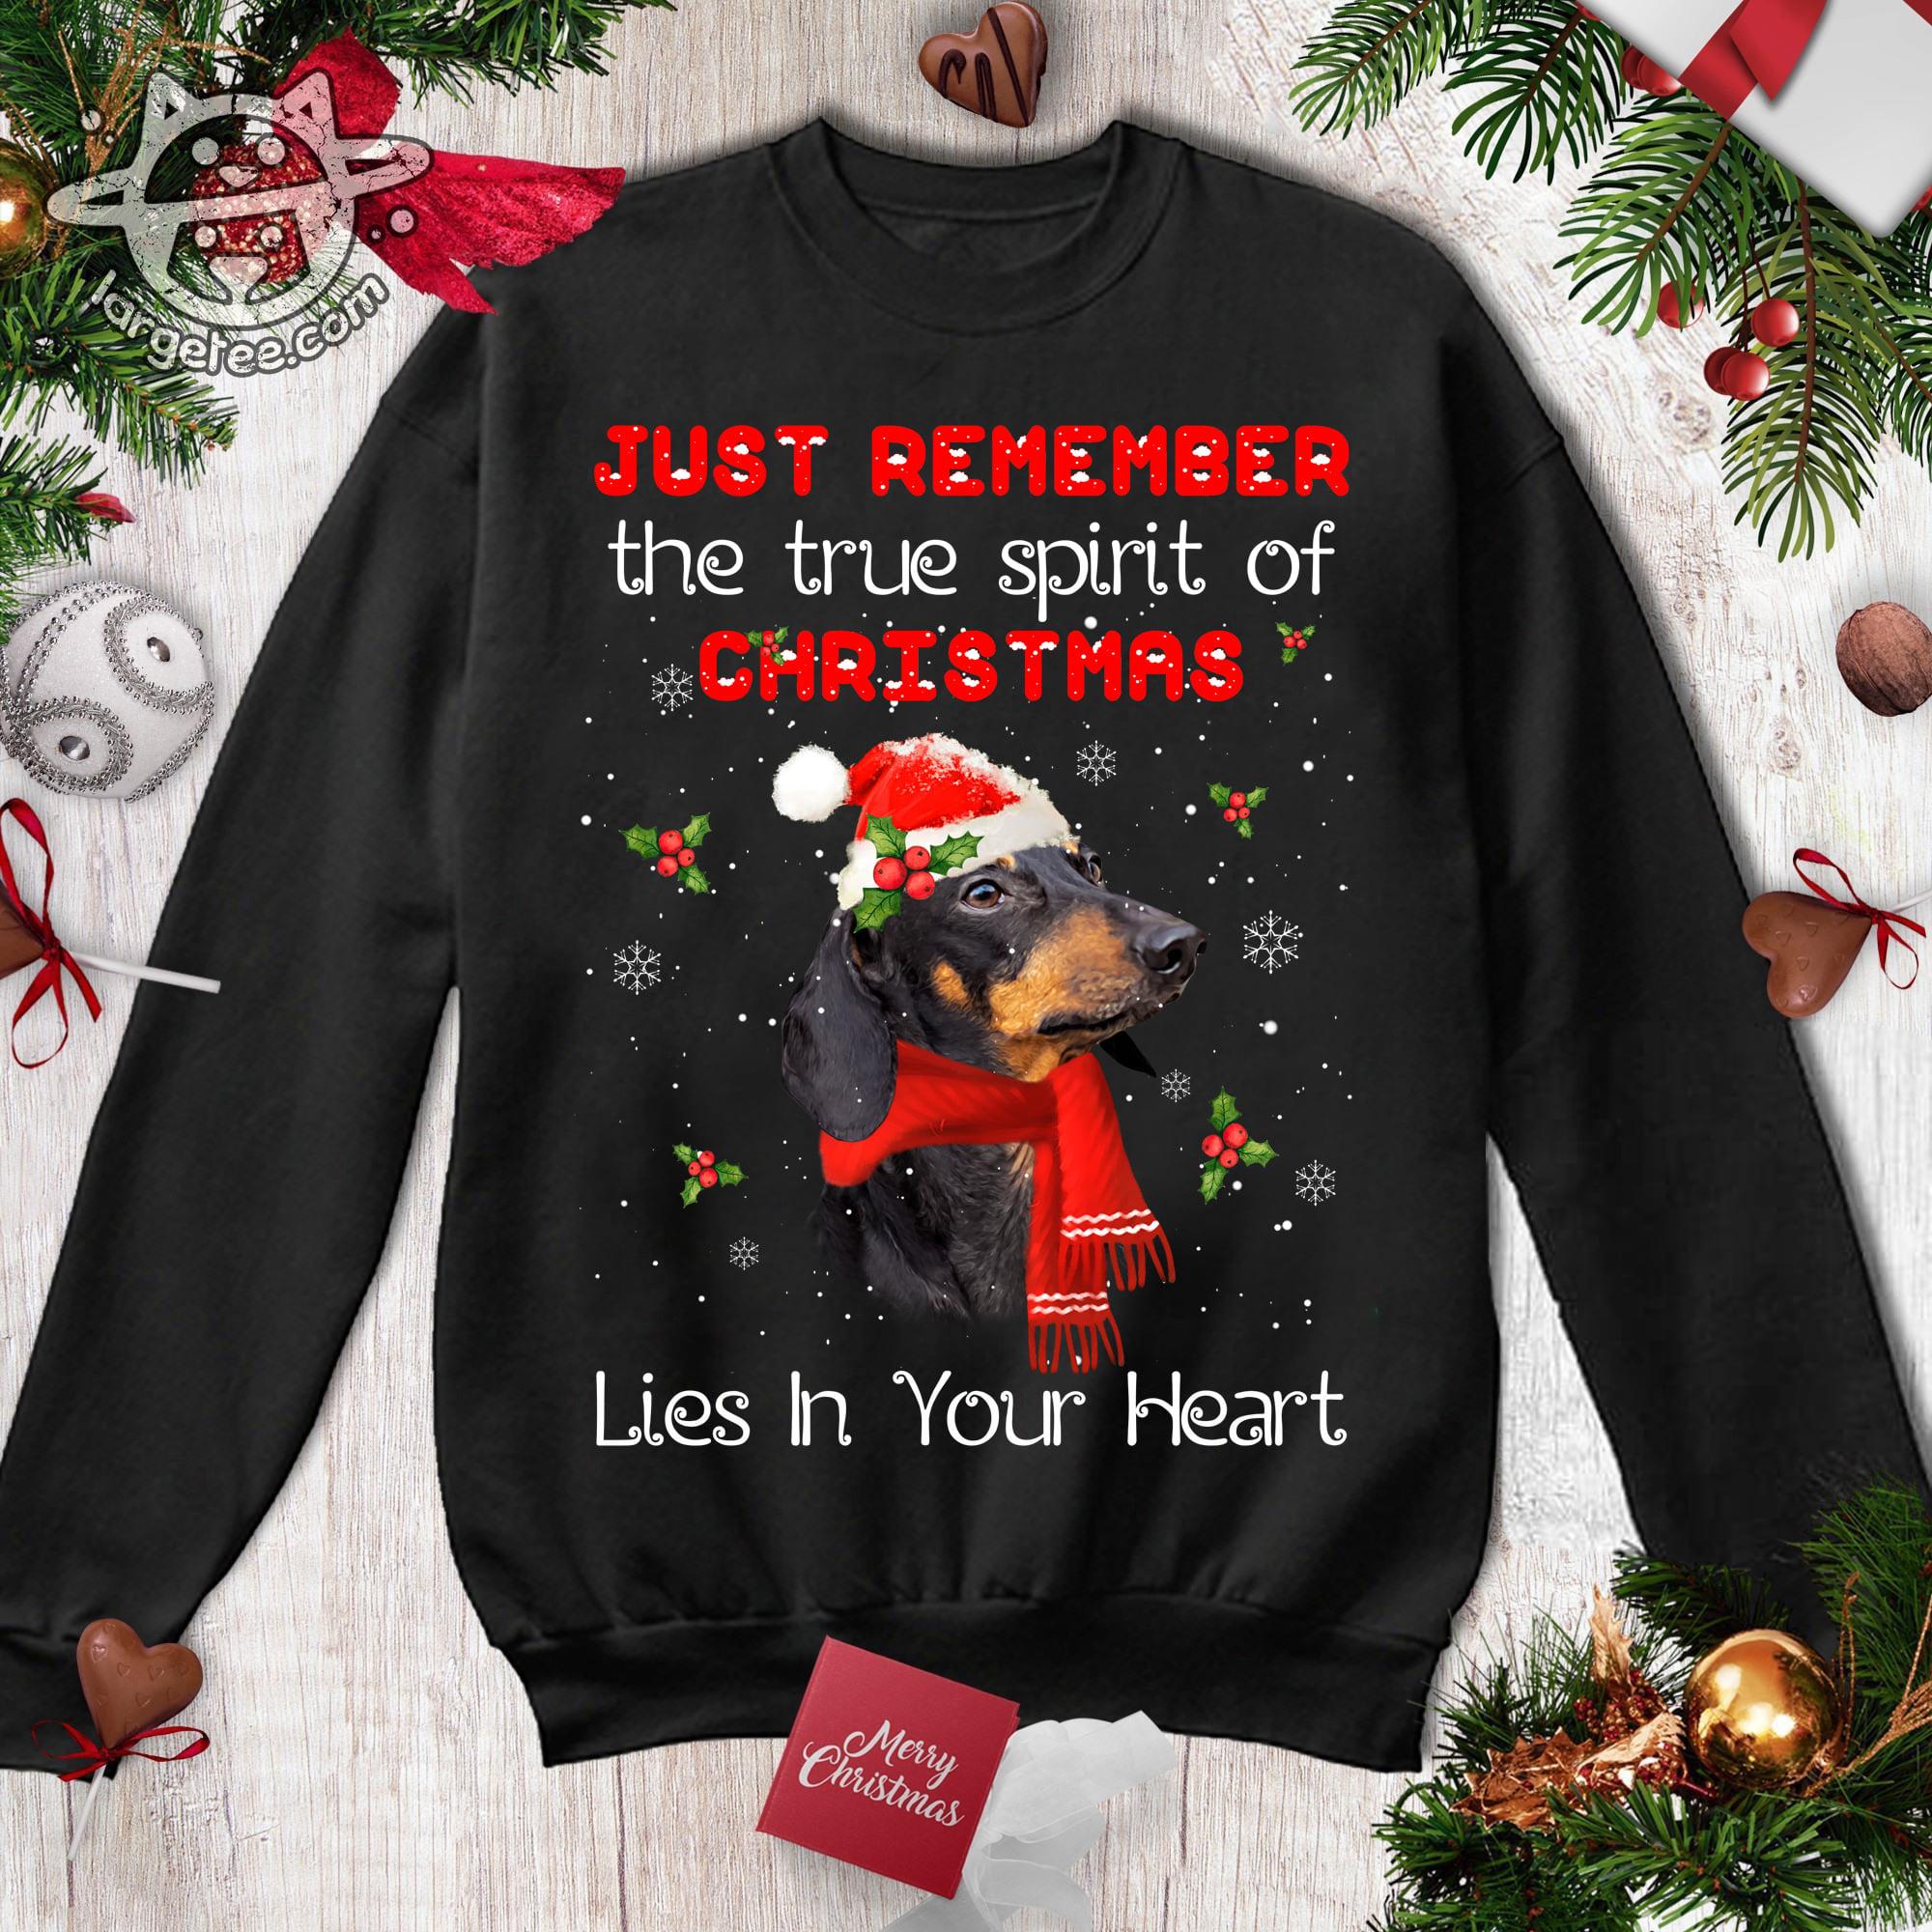 Doberman Pinschers Christmas Hat, Ugly Sweater - Just remember the true spirit of christmas lies in your heart